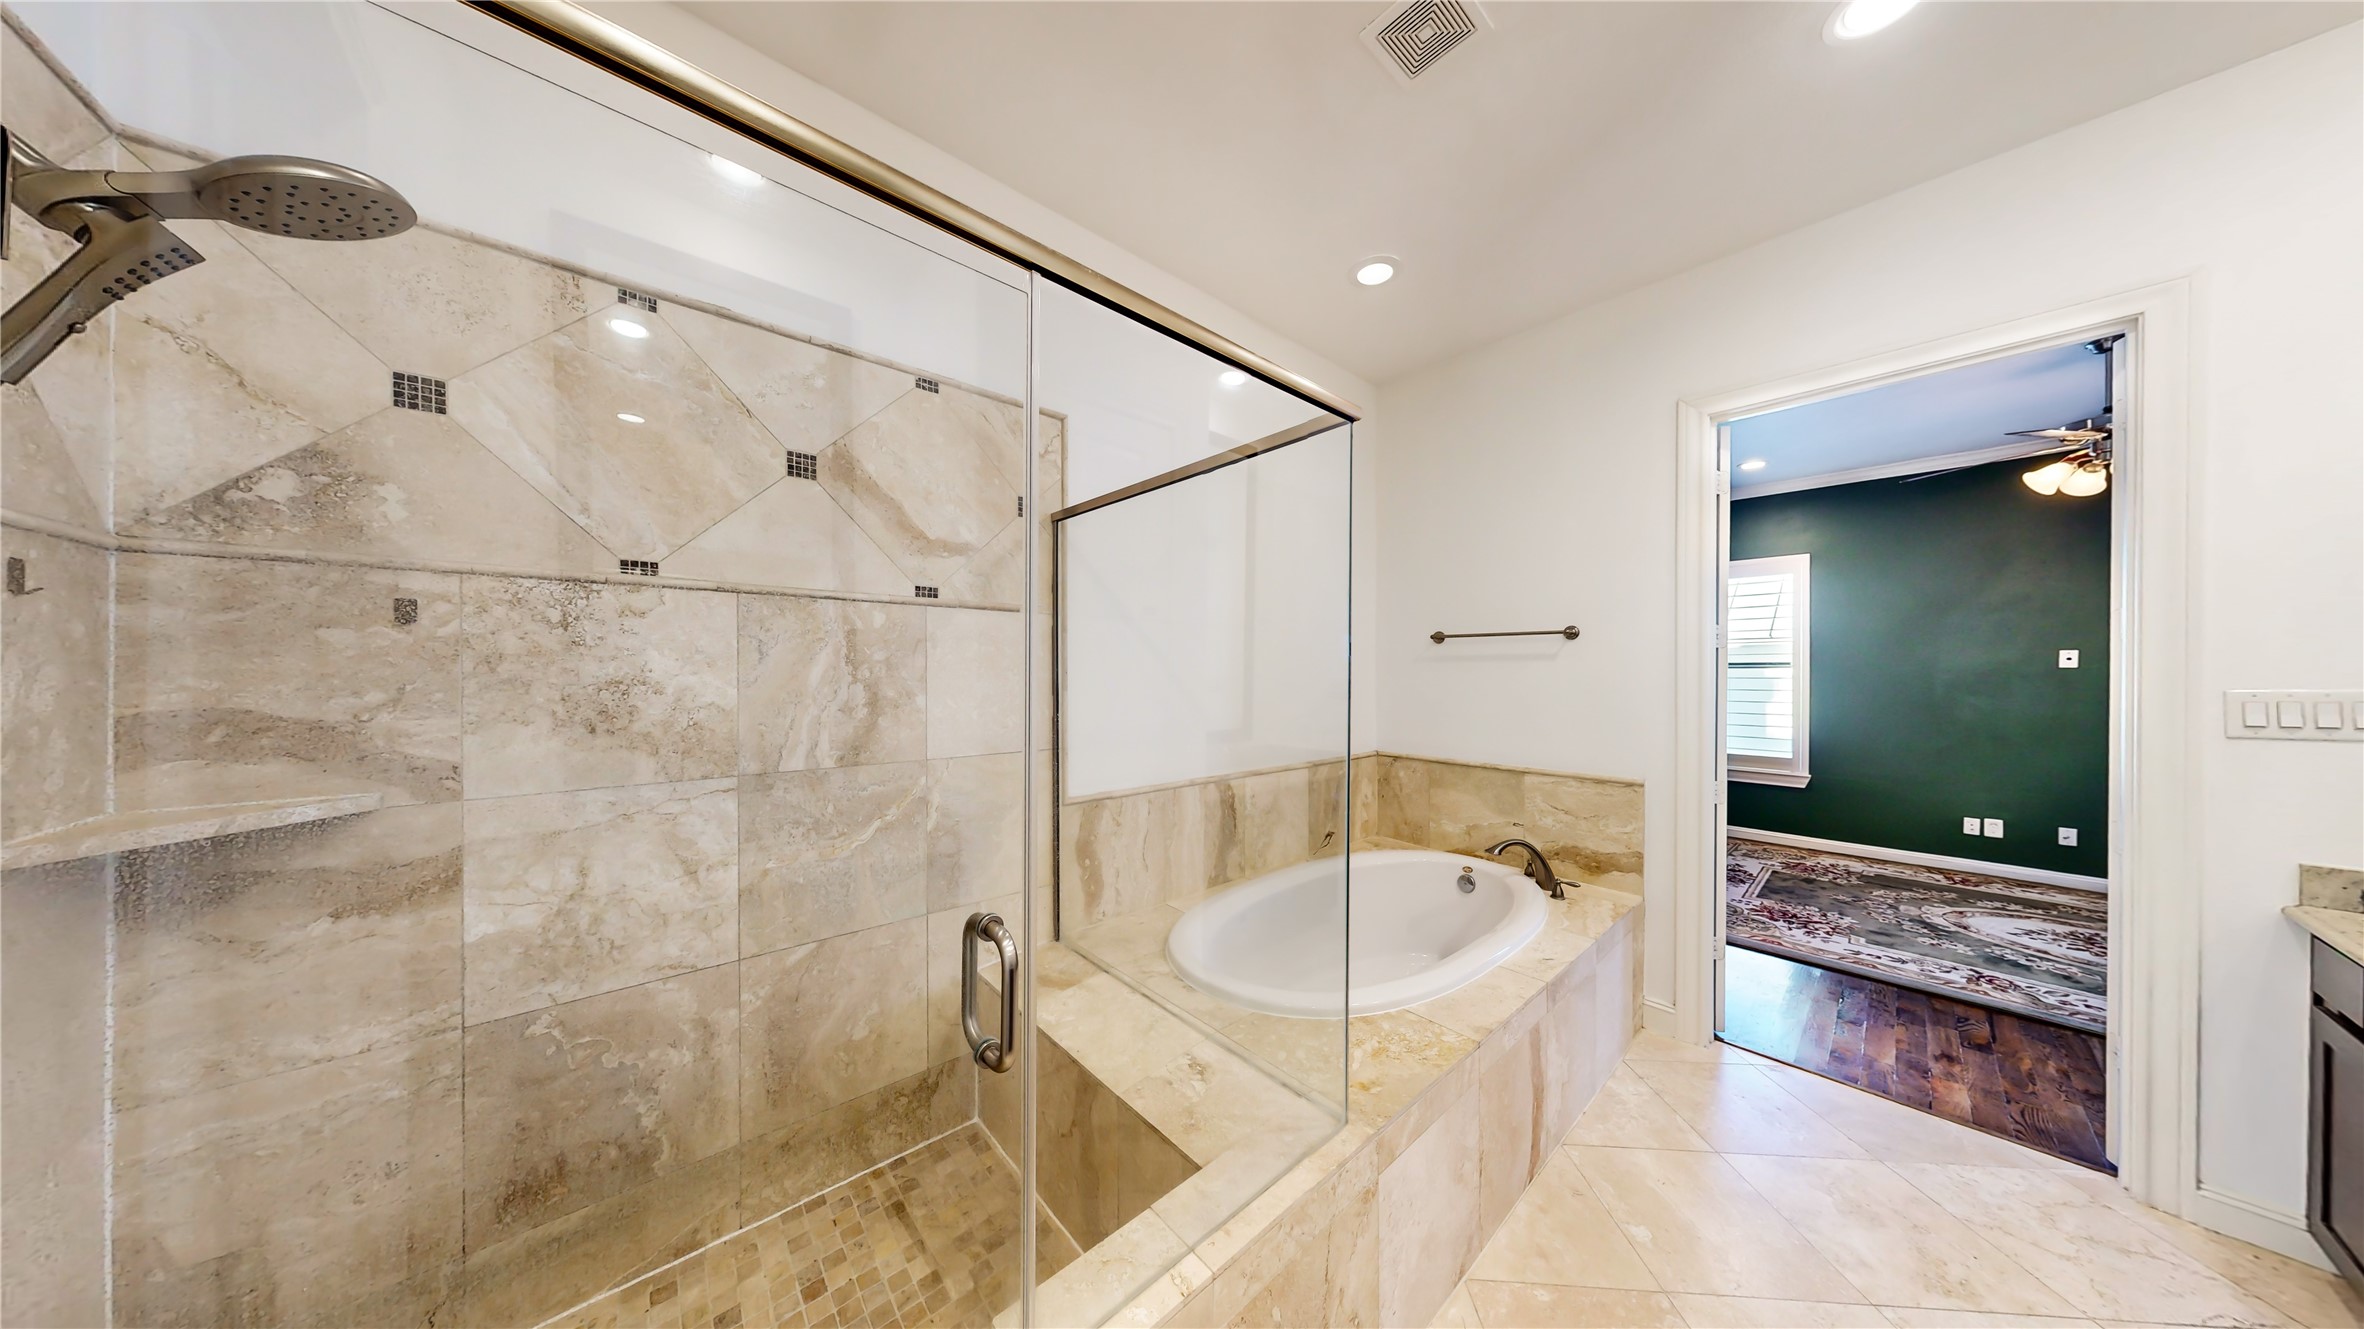 The primary bath is massive with a huge soaker tub and separate shower, two separate sinks, and a vanity area.